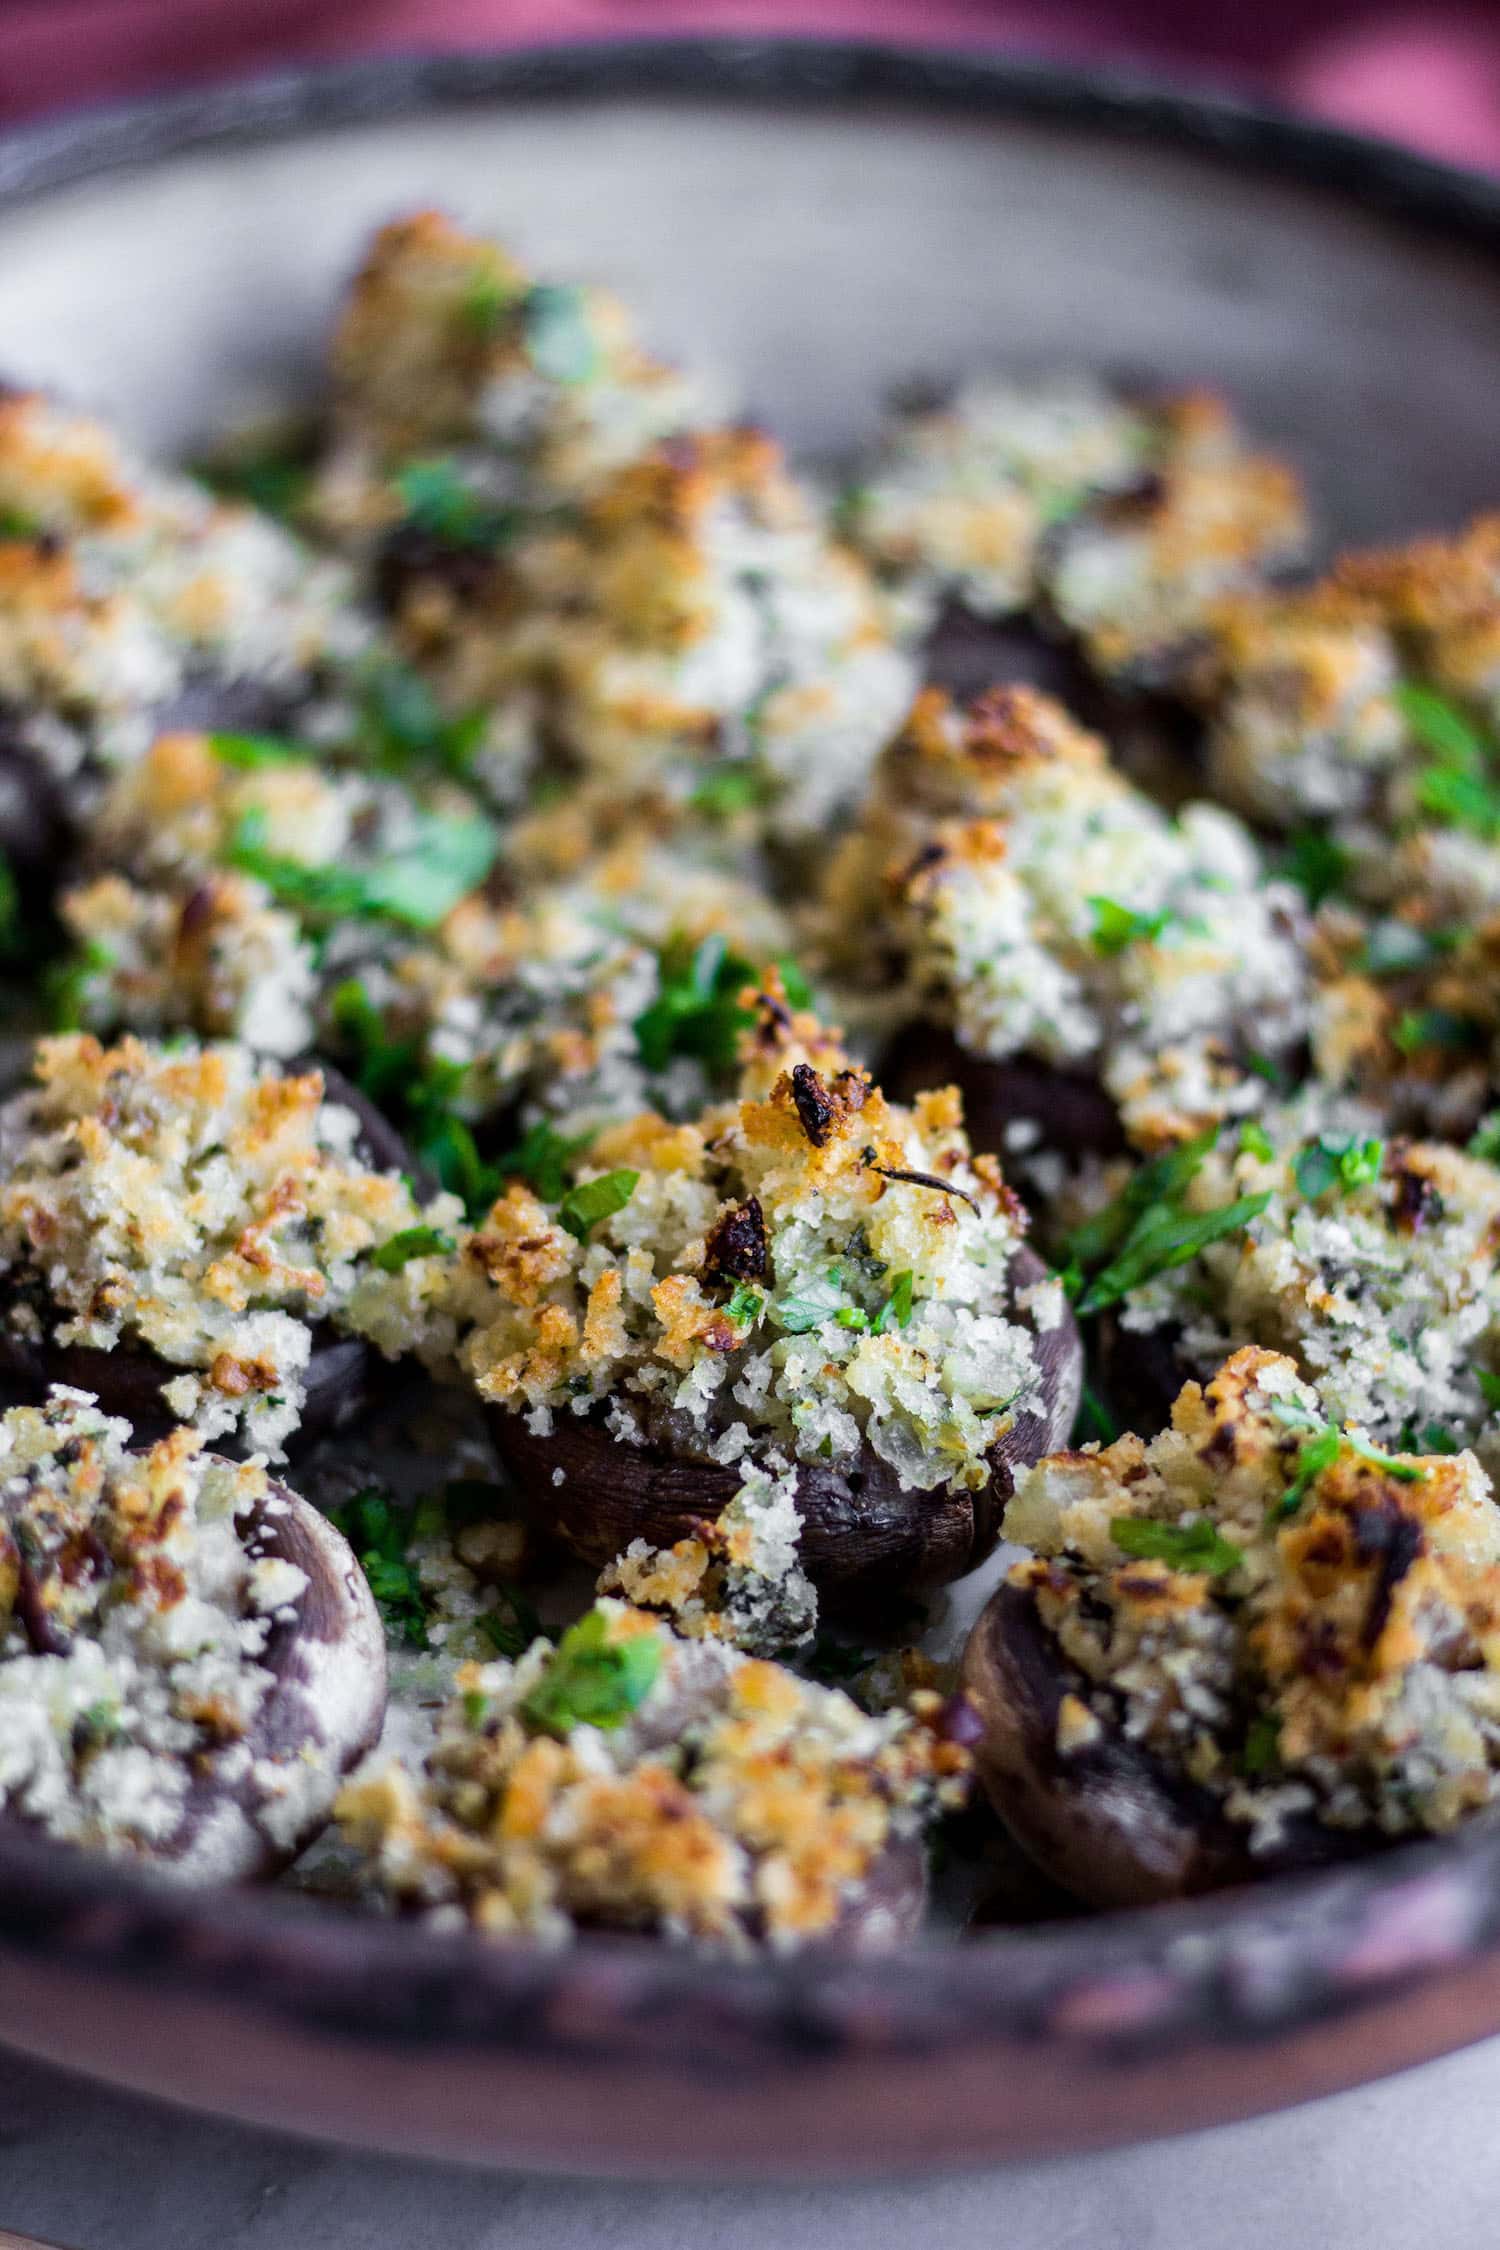 These Stuffed Mushrooms are simple and absolutely delicious! The mushrooms stems are chopped and sautéed with garlic, herbs, and breadcrumbs for a savory stuffing. 